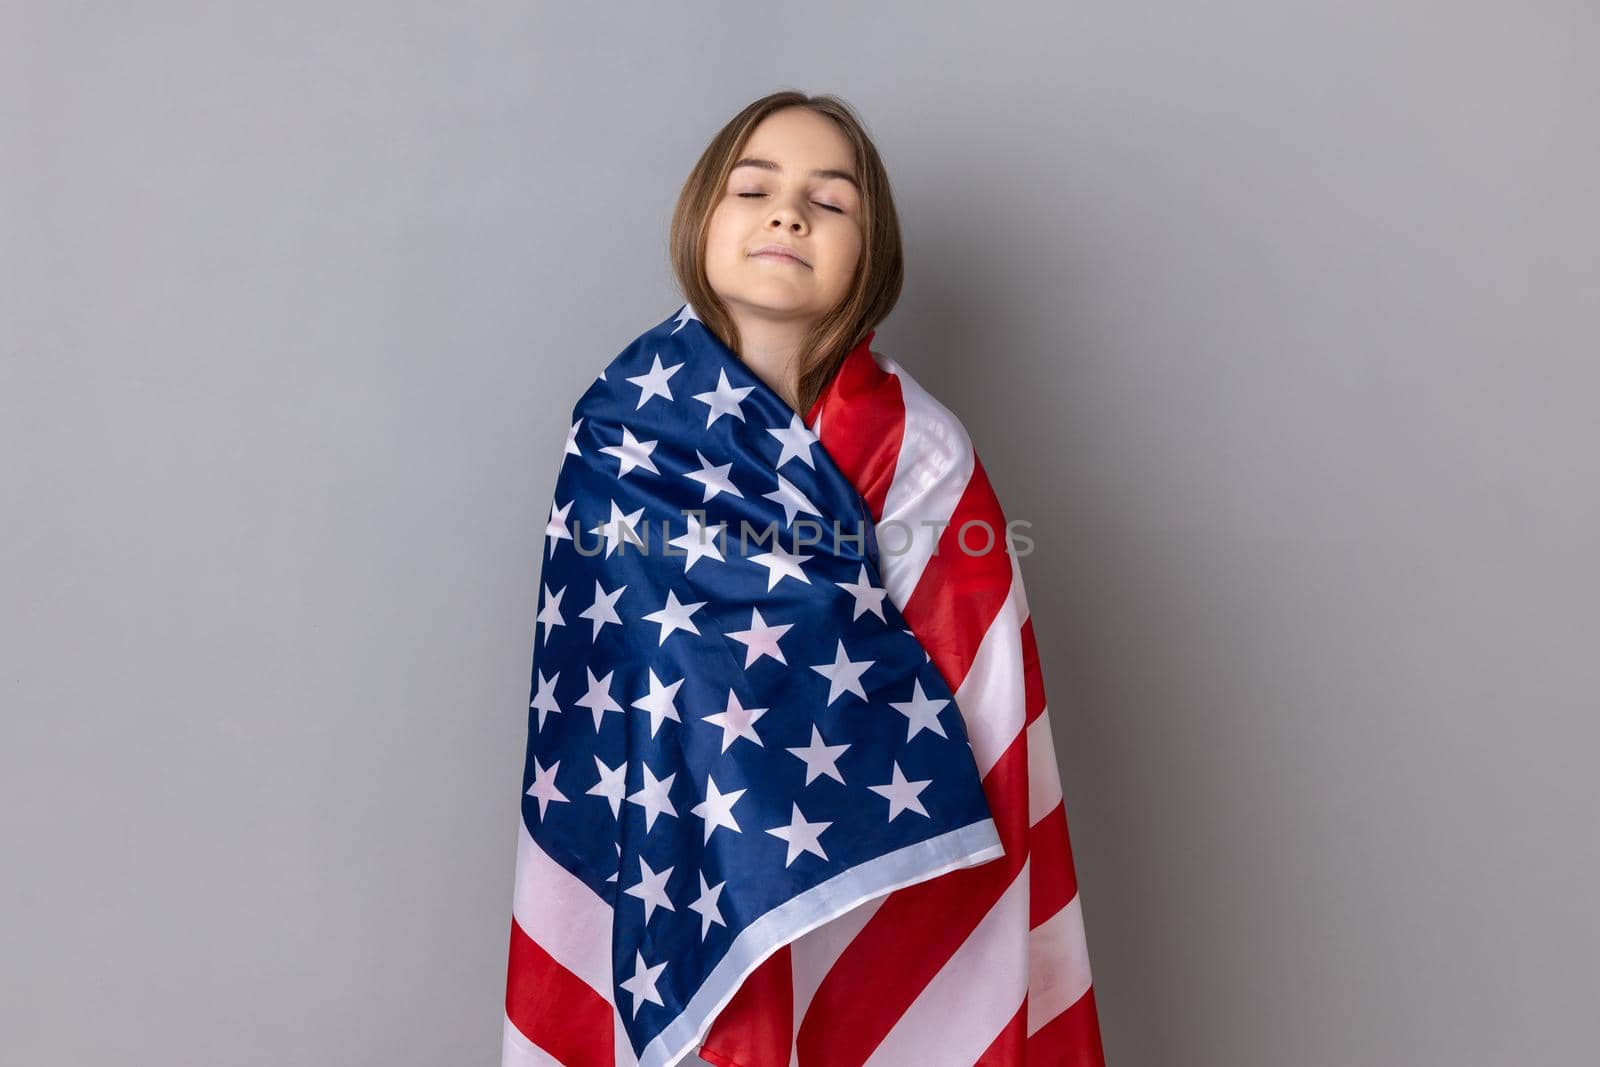 Portrait of dark haired patriotic little girl wearing striped T-shirt standing wrapped in american flag, keeping eyes closed, relocating to America. Indoor studio shot isolated on gray background.